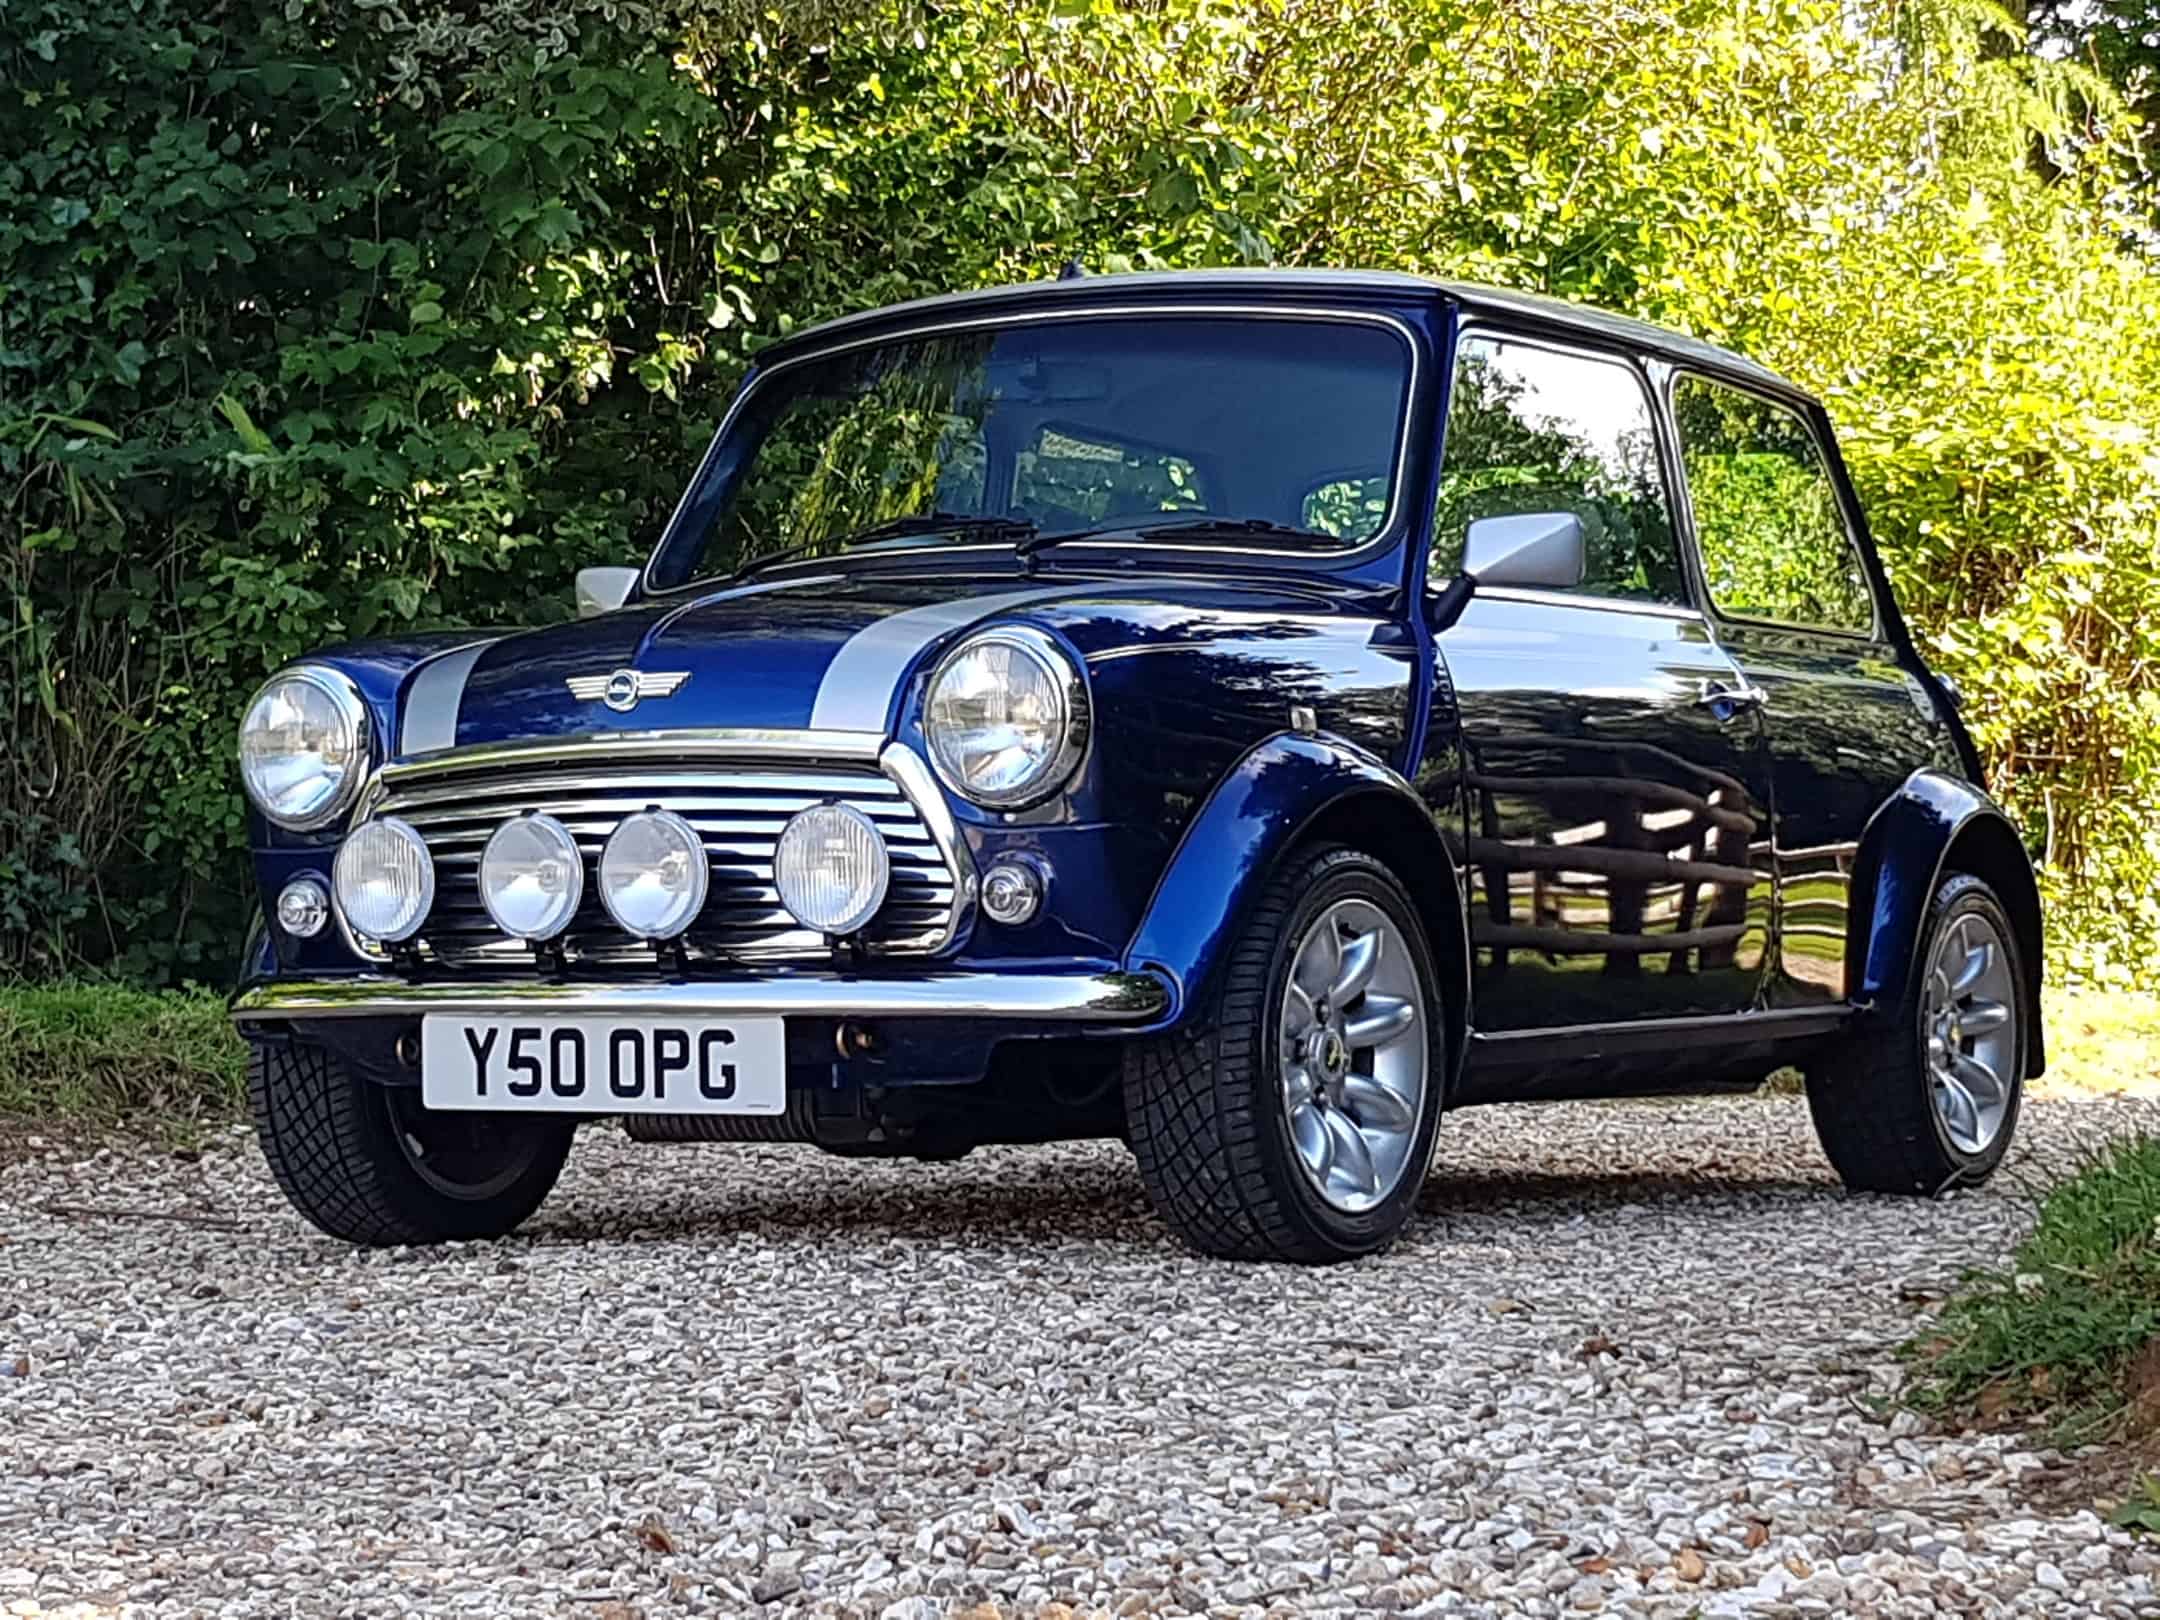 ** NOW SOLD ** Stunning Mini Cooper Sport 500 On Just 7050 Miles From New!!